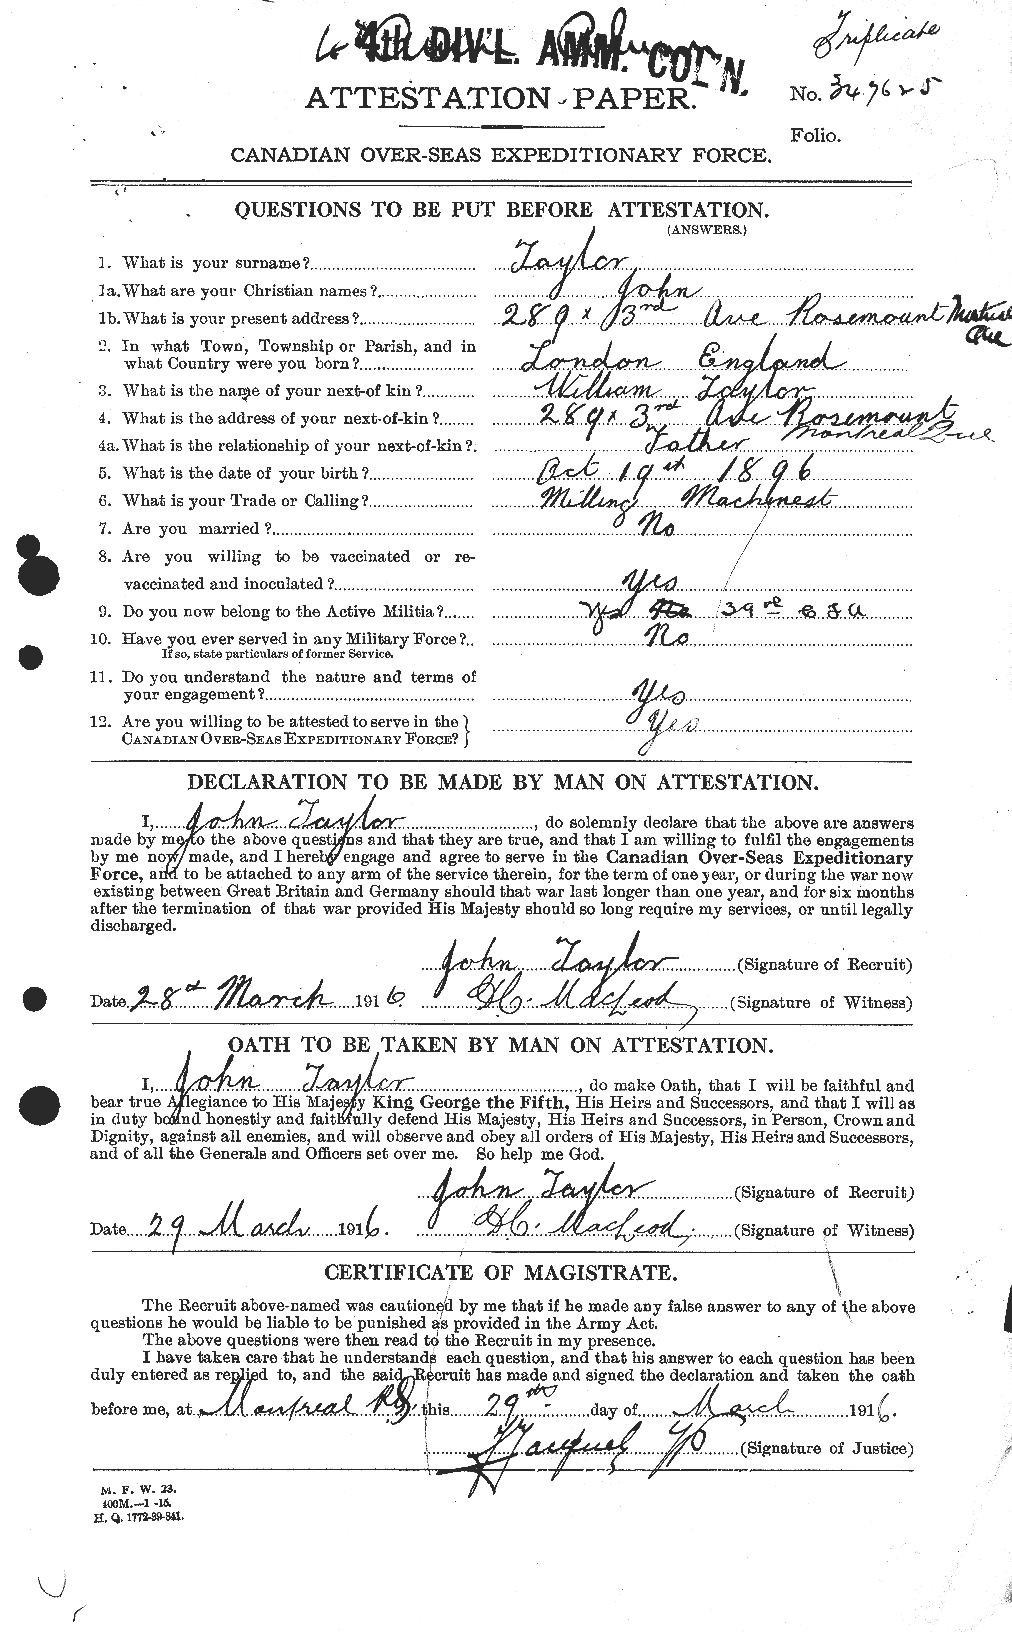 Personnel Records of the First World War - CEF 627014a